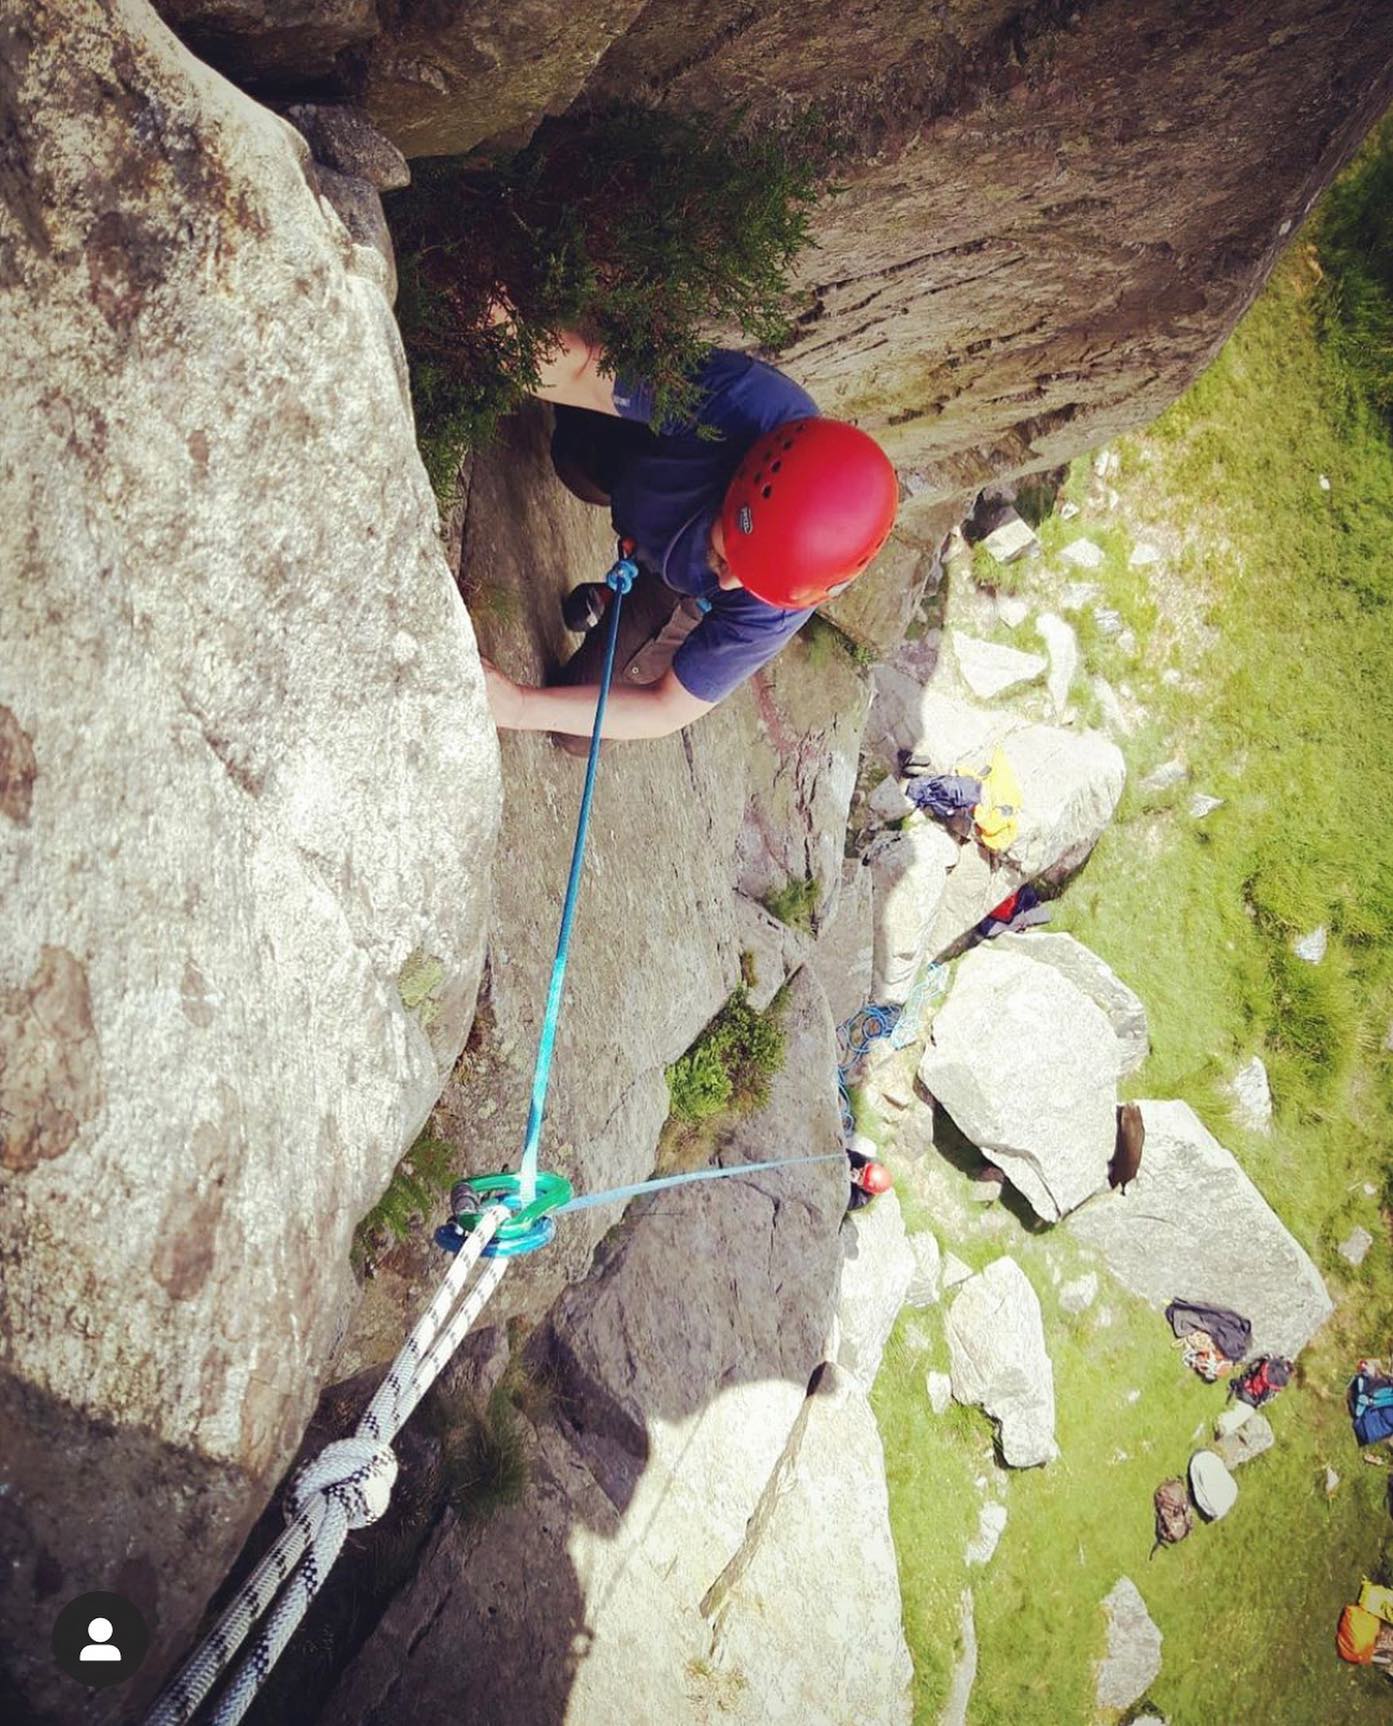 Our Autumn Rock climbing sessions are going ahead on 17 and 19 October at Windgather Rocks near Whaley Bridge in the Peak District. More info and booking at www.wilderness-development.com, link in our bio 🧗‍♀️⛰🧗‍♀️
.
.
.
#wildernessdevelopment #smallbusiness #rockclimbing #climbing #scrambling #abseiling #trysomethingnew #windgatherrocks #peakdistrict #whaleybridge #mountainsfellsandhikes #roamtheuk #outdoorpursuits #outdooradventures #outdooractivities #nationalparksuk #booknow